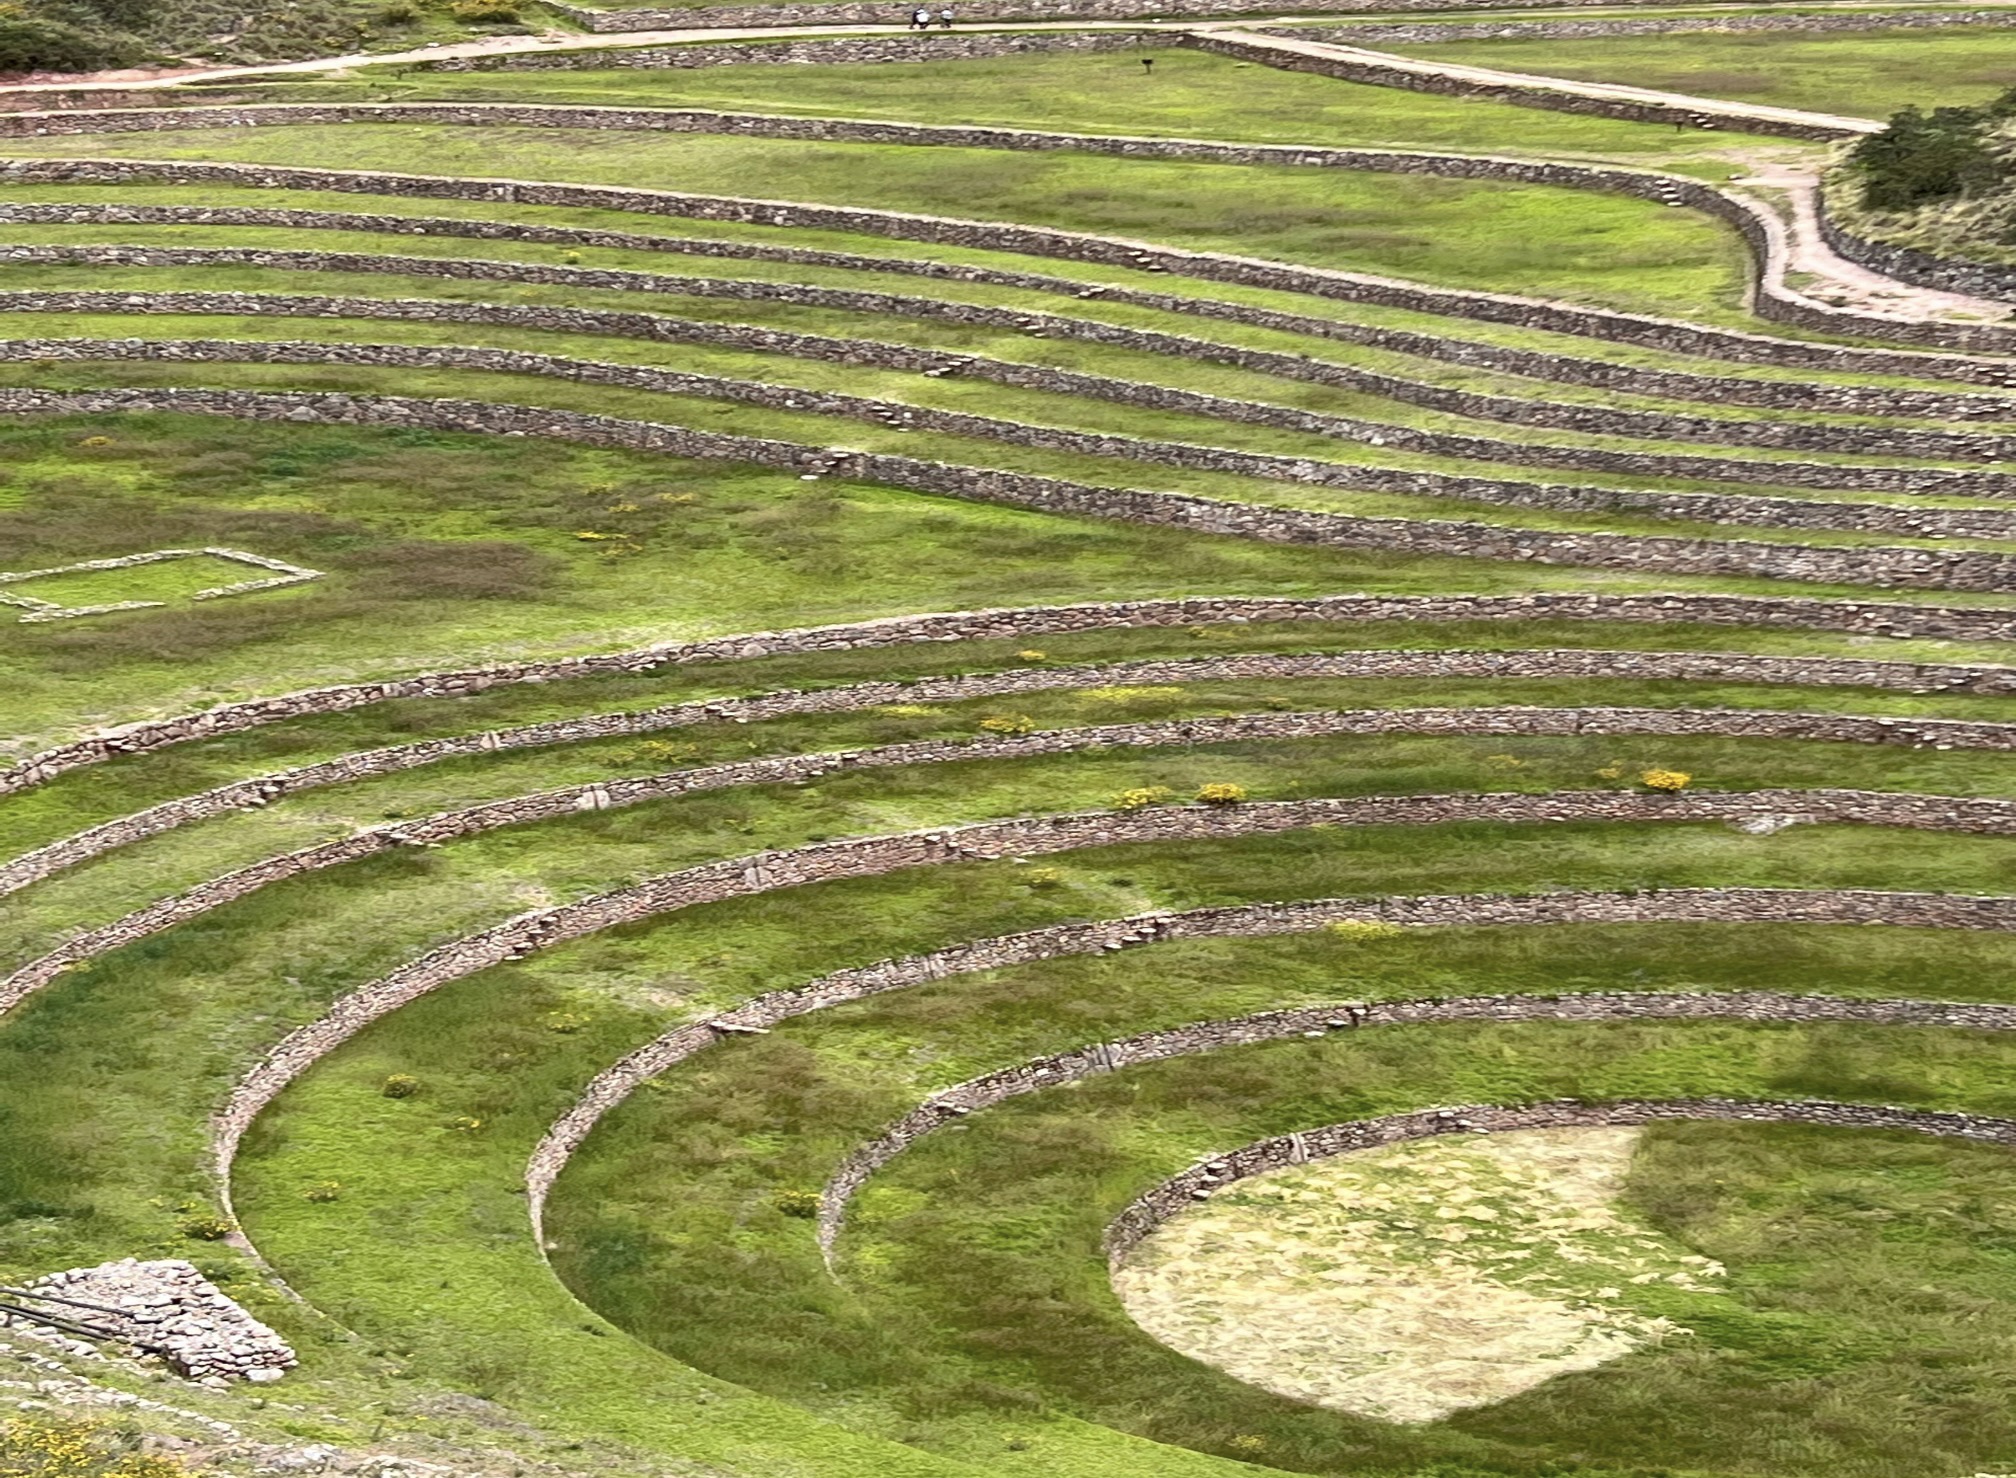 View of the Moray archaeological site in the Sacred Valley of the Incas.